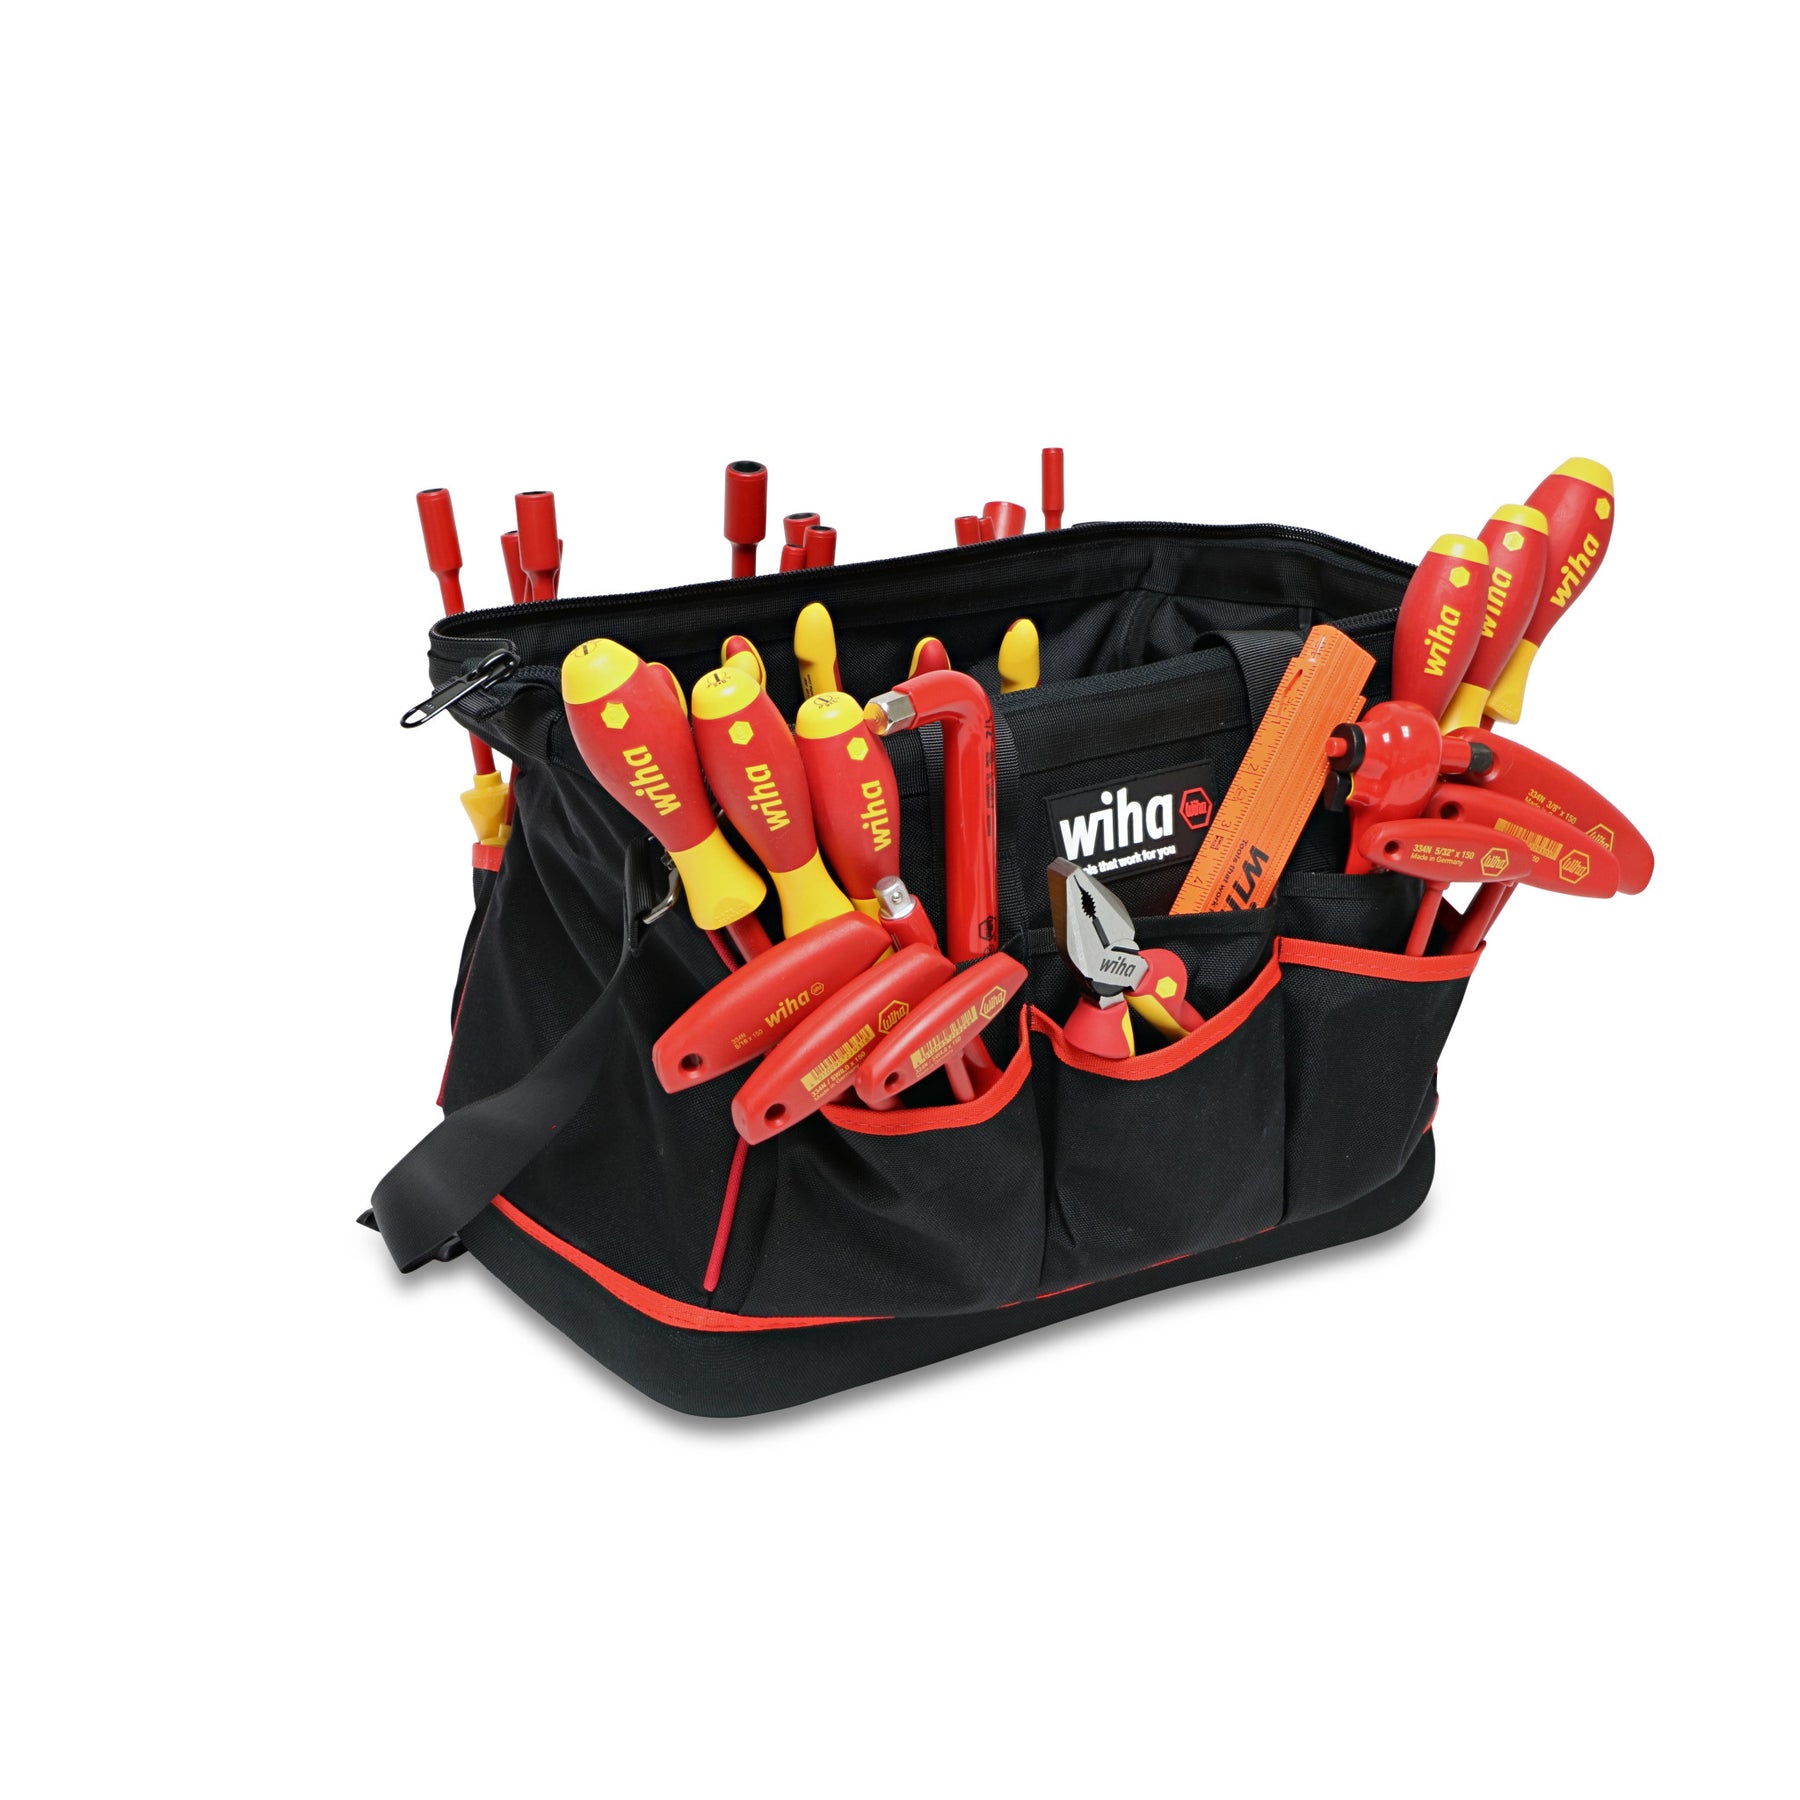 80 Piece Master Electrician's Insulated Tool Set in Canvas Tool Bag